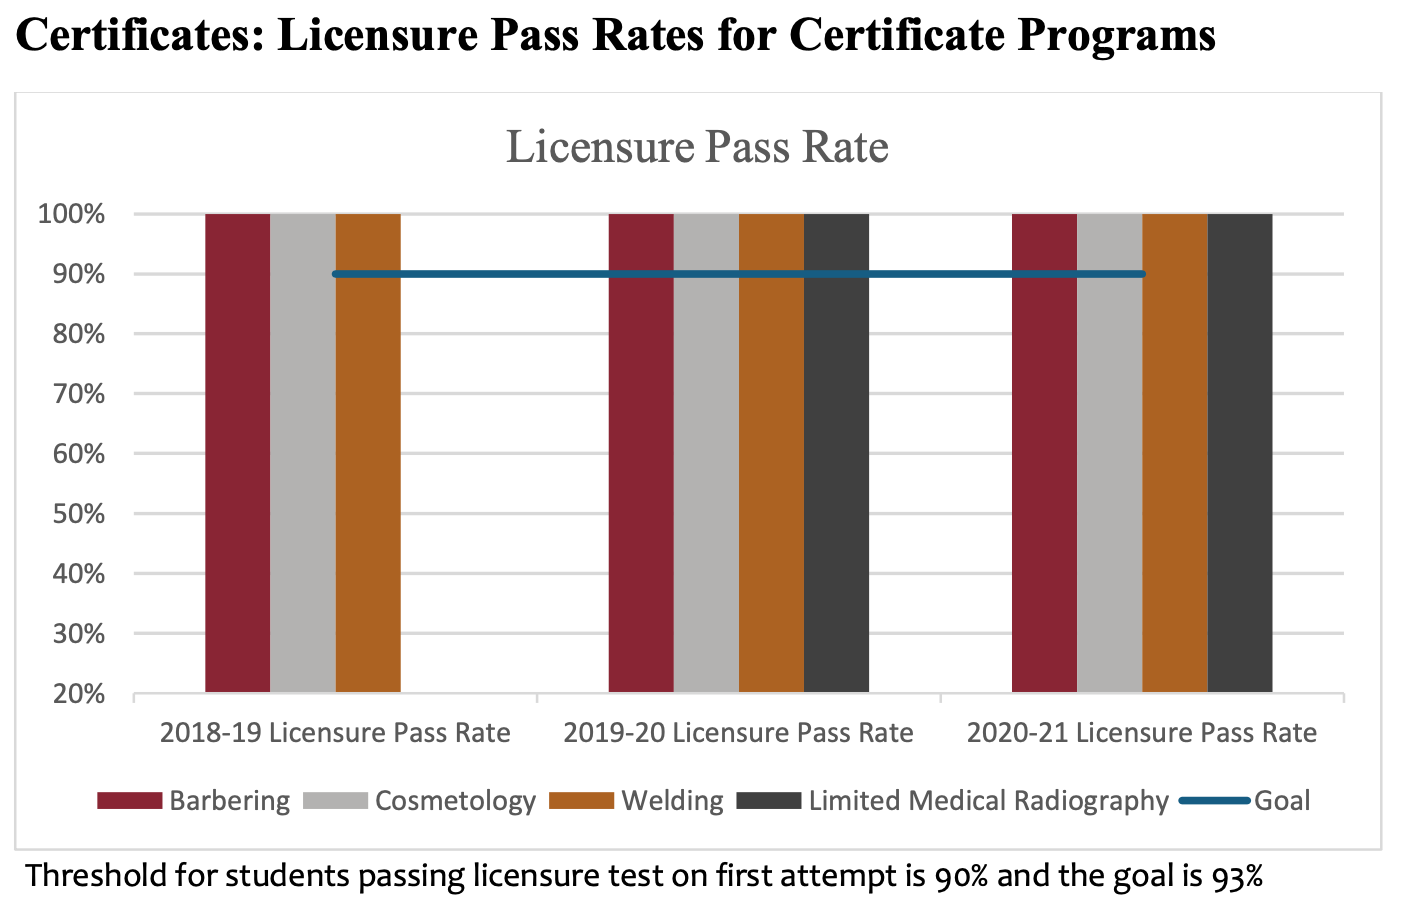 Certificates: Licensure Pass Rates for Certificate Programs